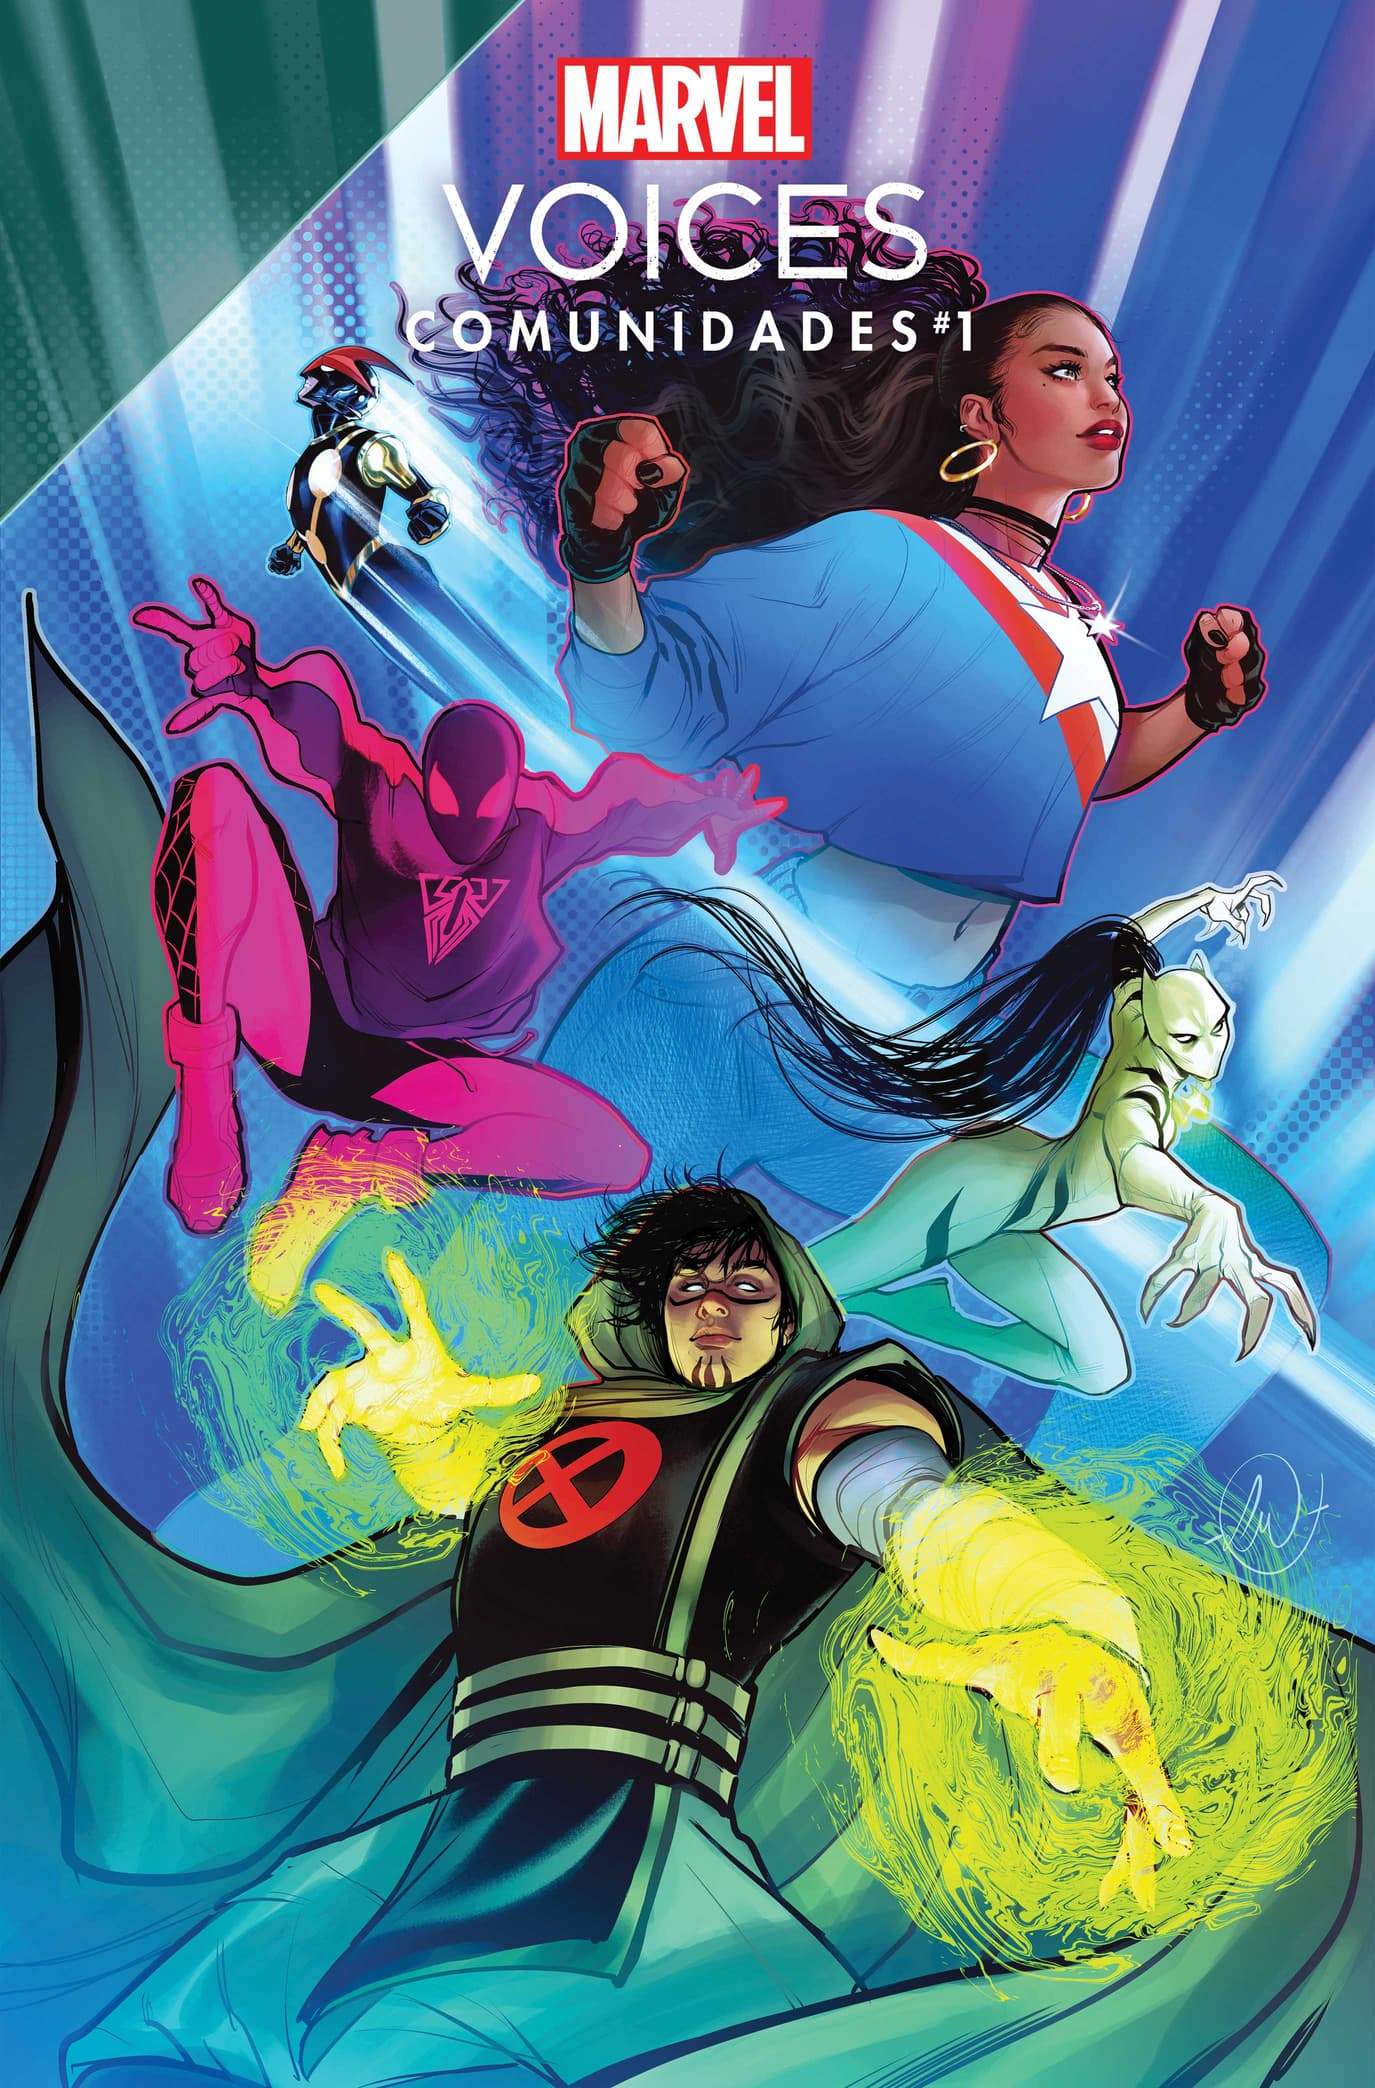 MARVEL’S VOICES: COMUNIDADES #1 Cover by LUCAS WERNECK